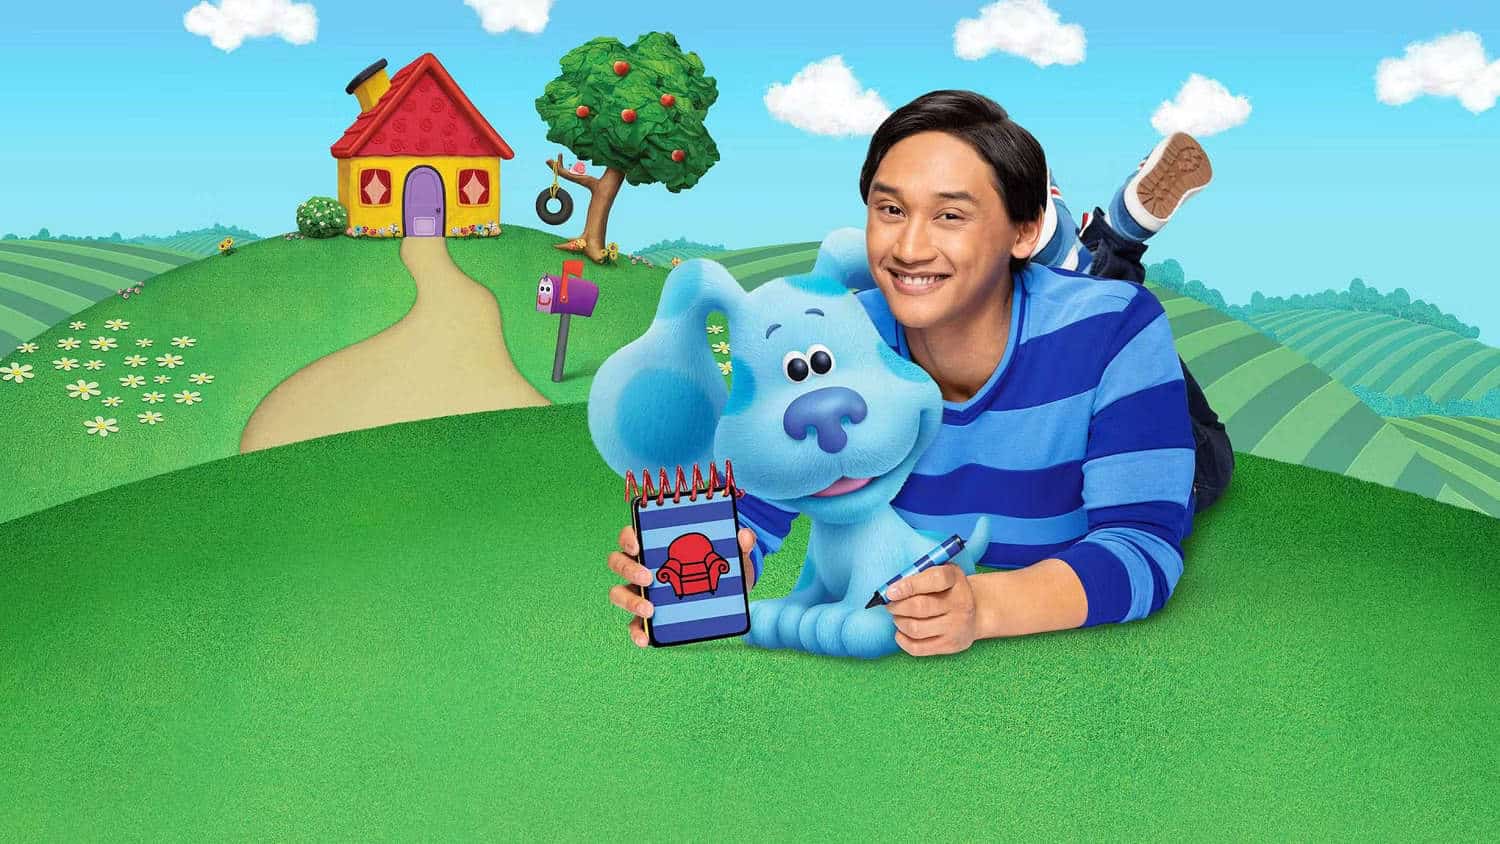 Blue’s Clues Movie Is The Next SpiderMan No Way Home Fortress of